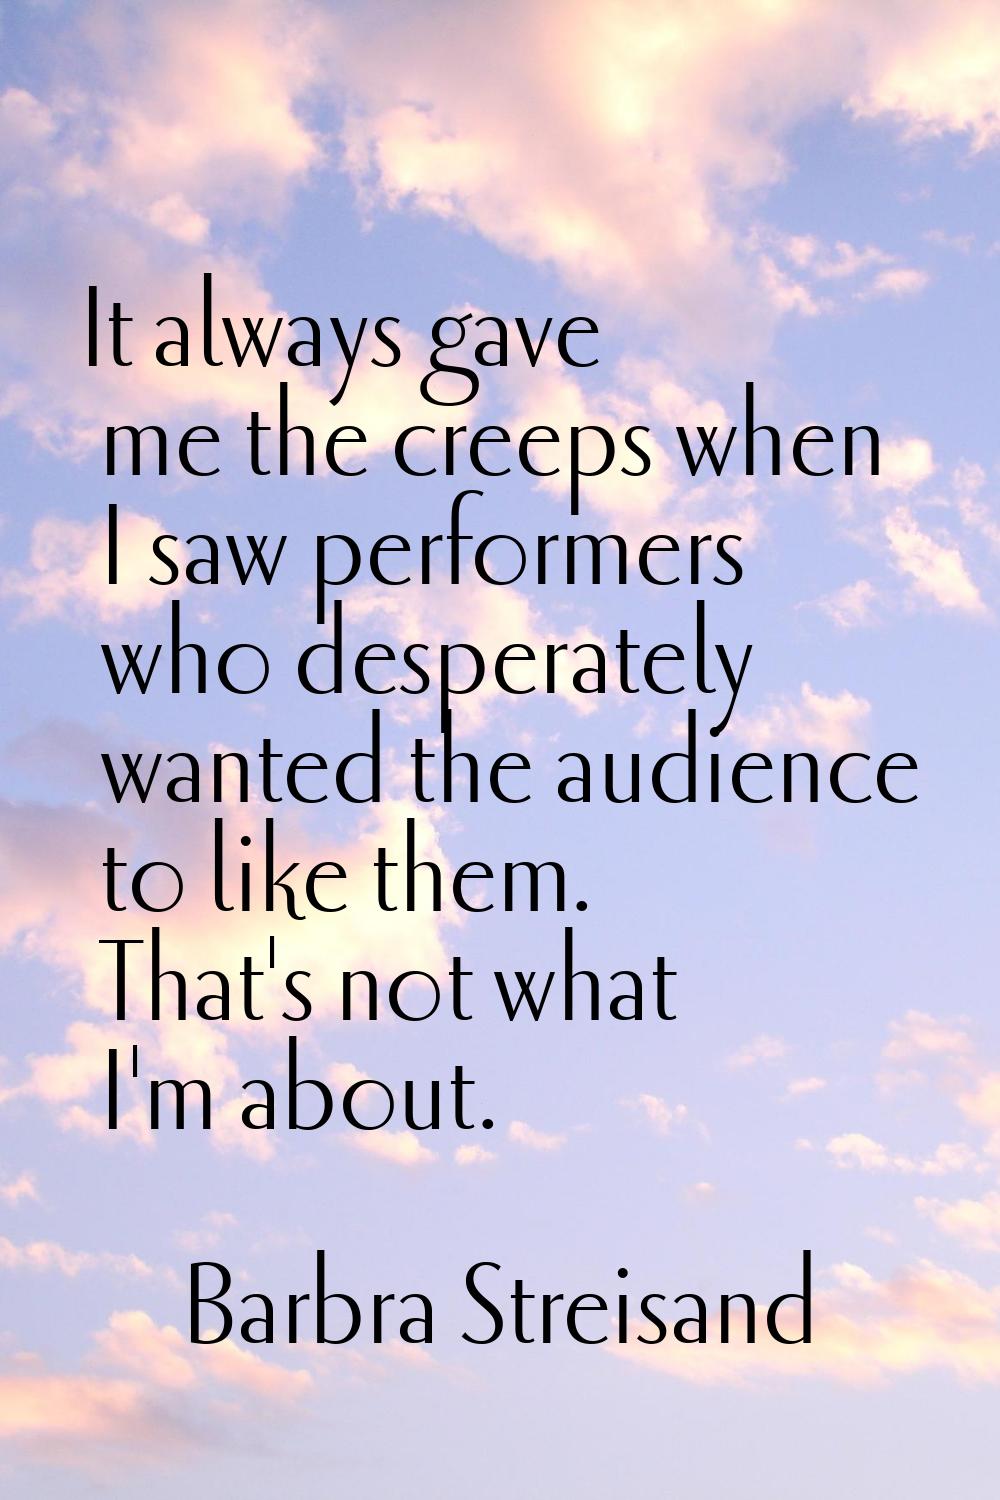 It always gave me the creeps when I saw performers who desperately wanted the audience to like them